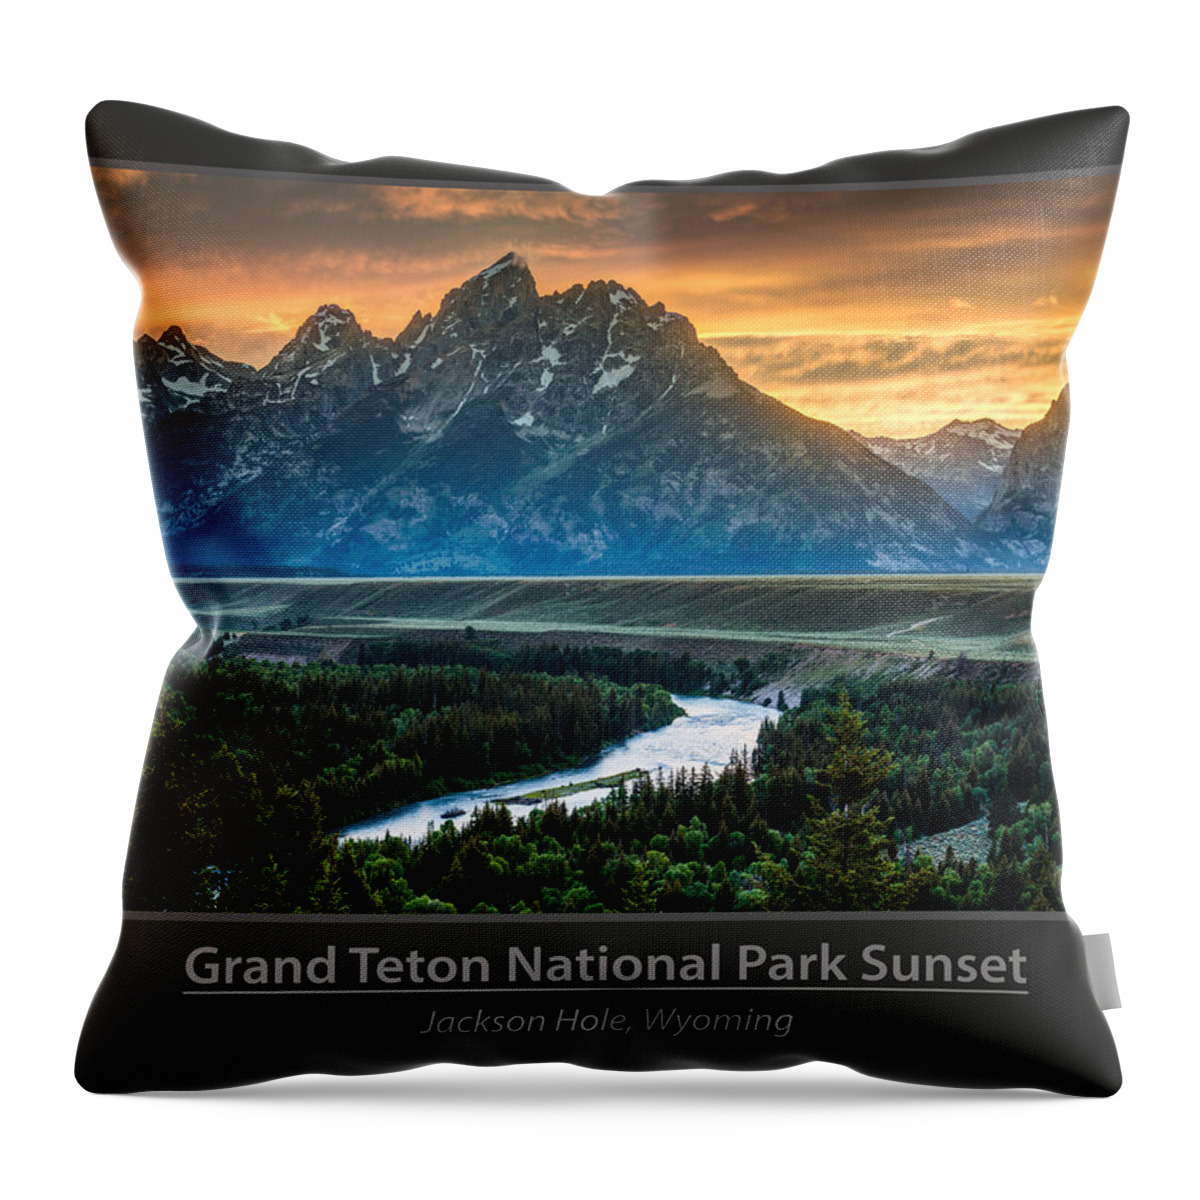  Throw Pillow featuring the photograph Grand Teton National Park Sunset Poster by Gary Whitton